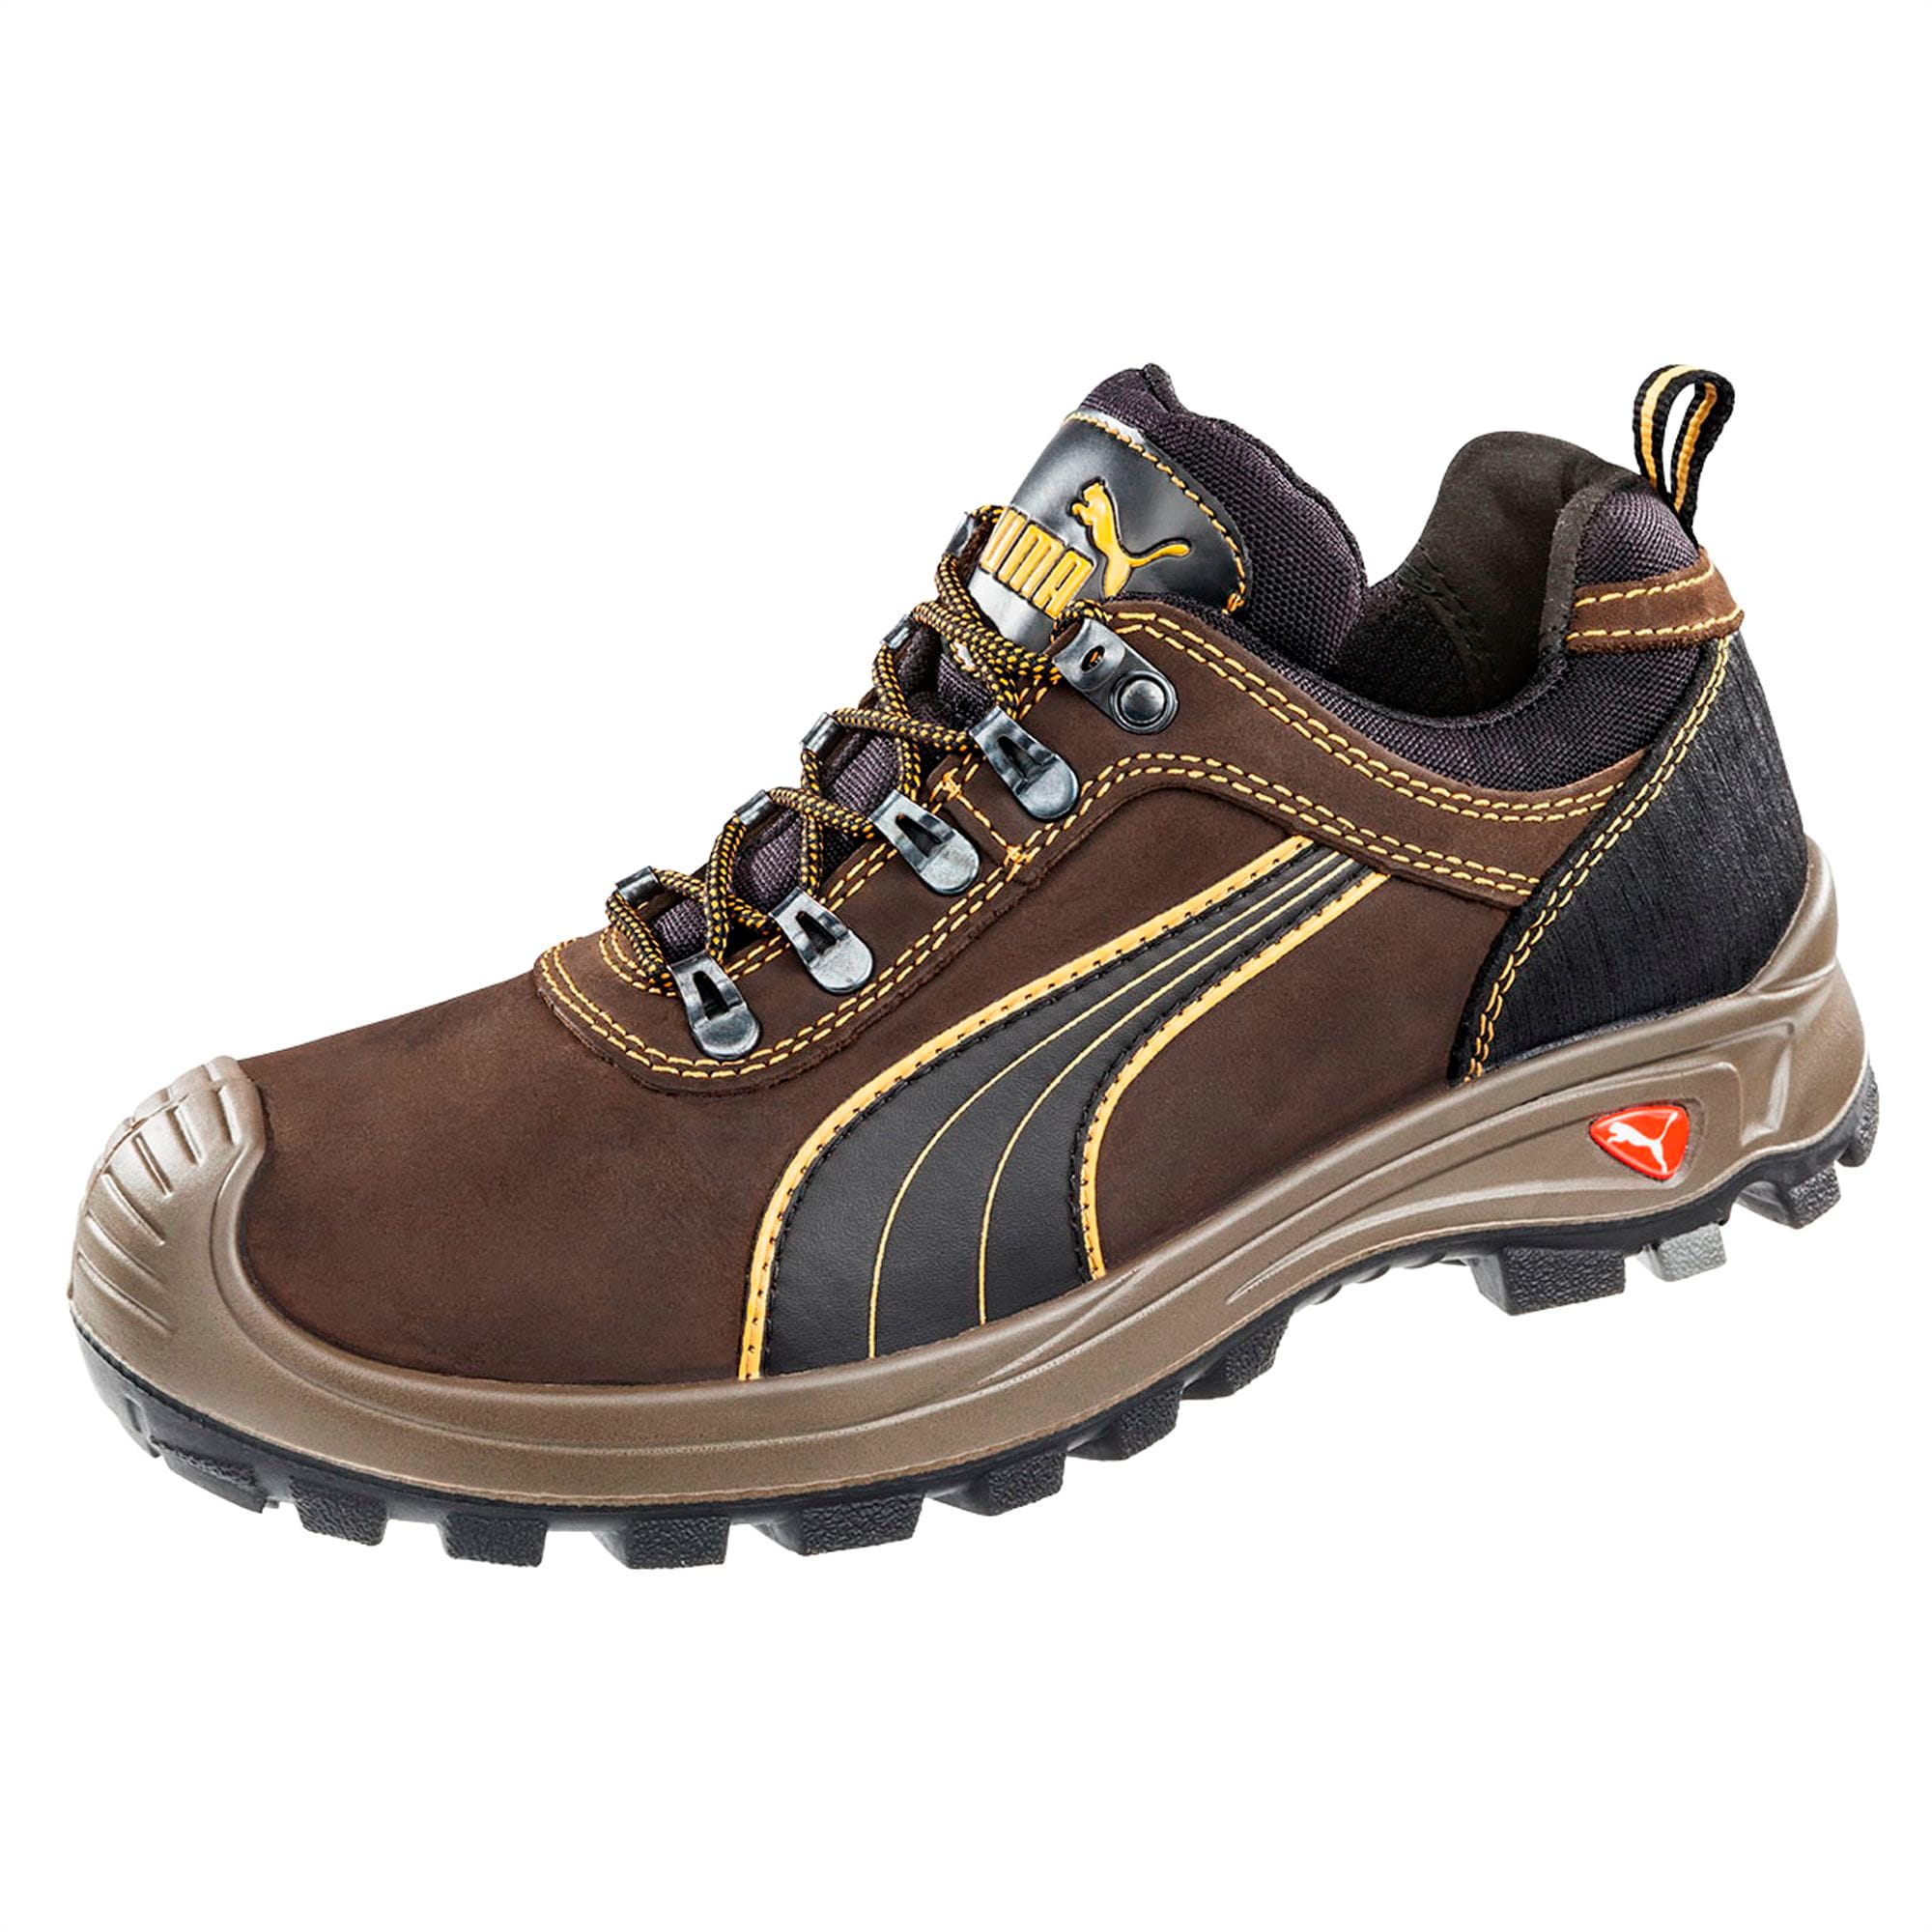 Sierra Nevada Low S3 HRO SRC Safety Shoes